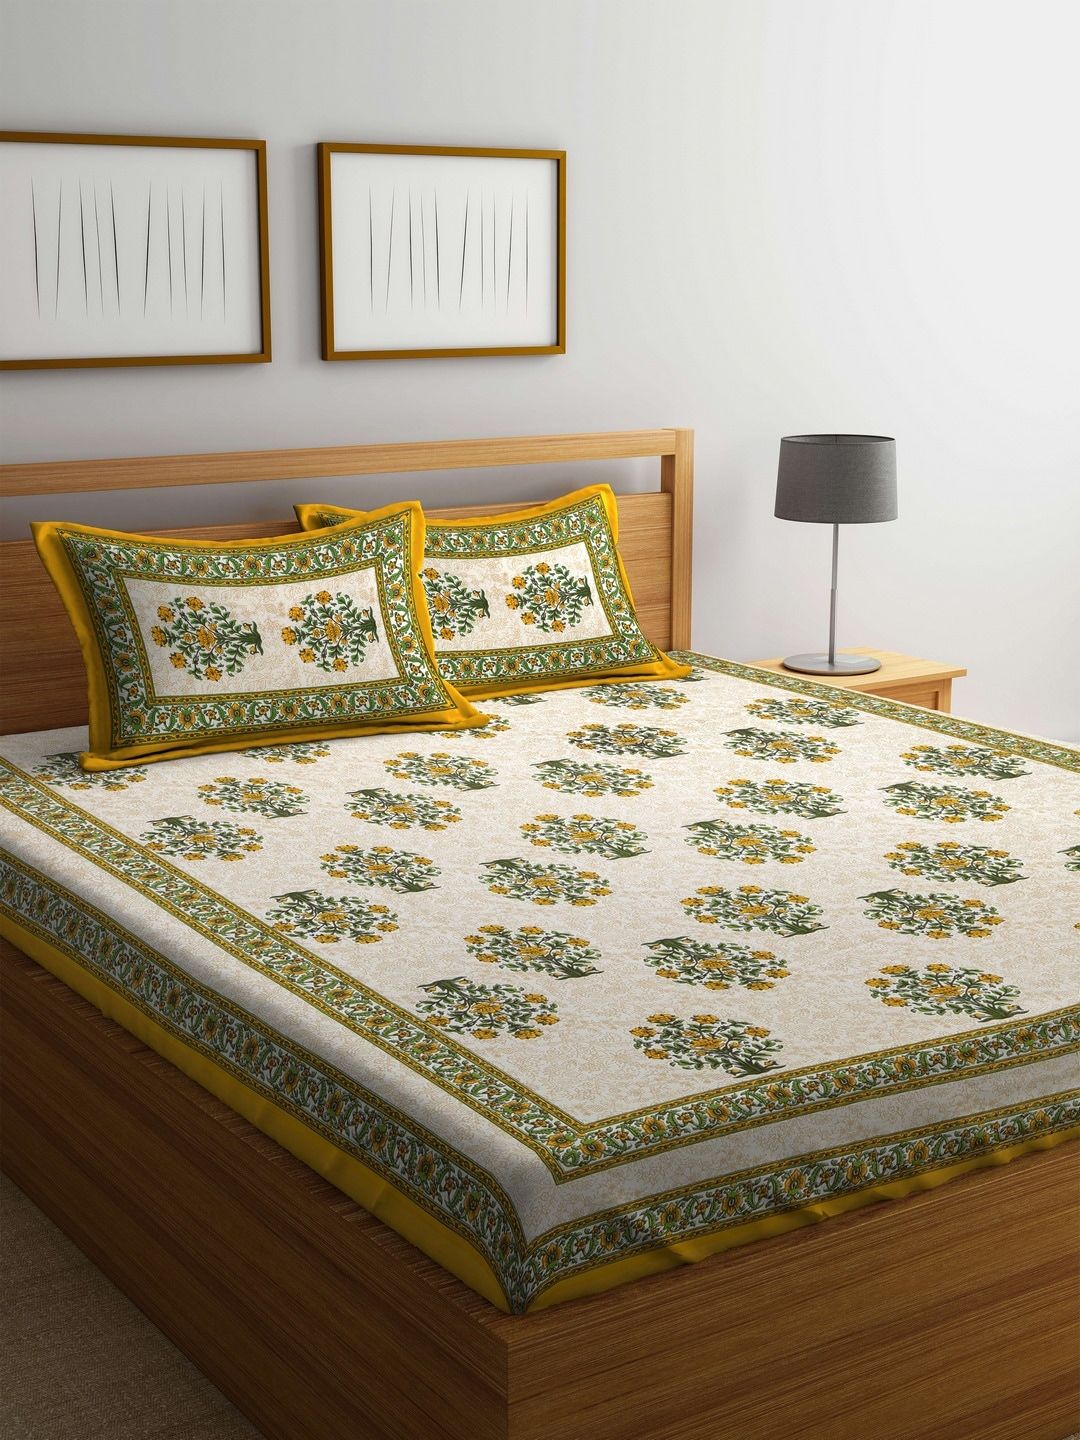 Rajasthan Decor Off-White & Green Floral Flat 144 TC Cotton 1 King Bedsheet with 2 Pillow Covers Price in India